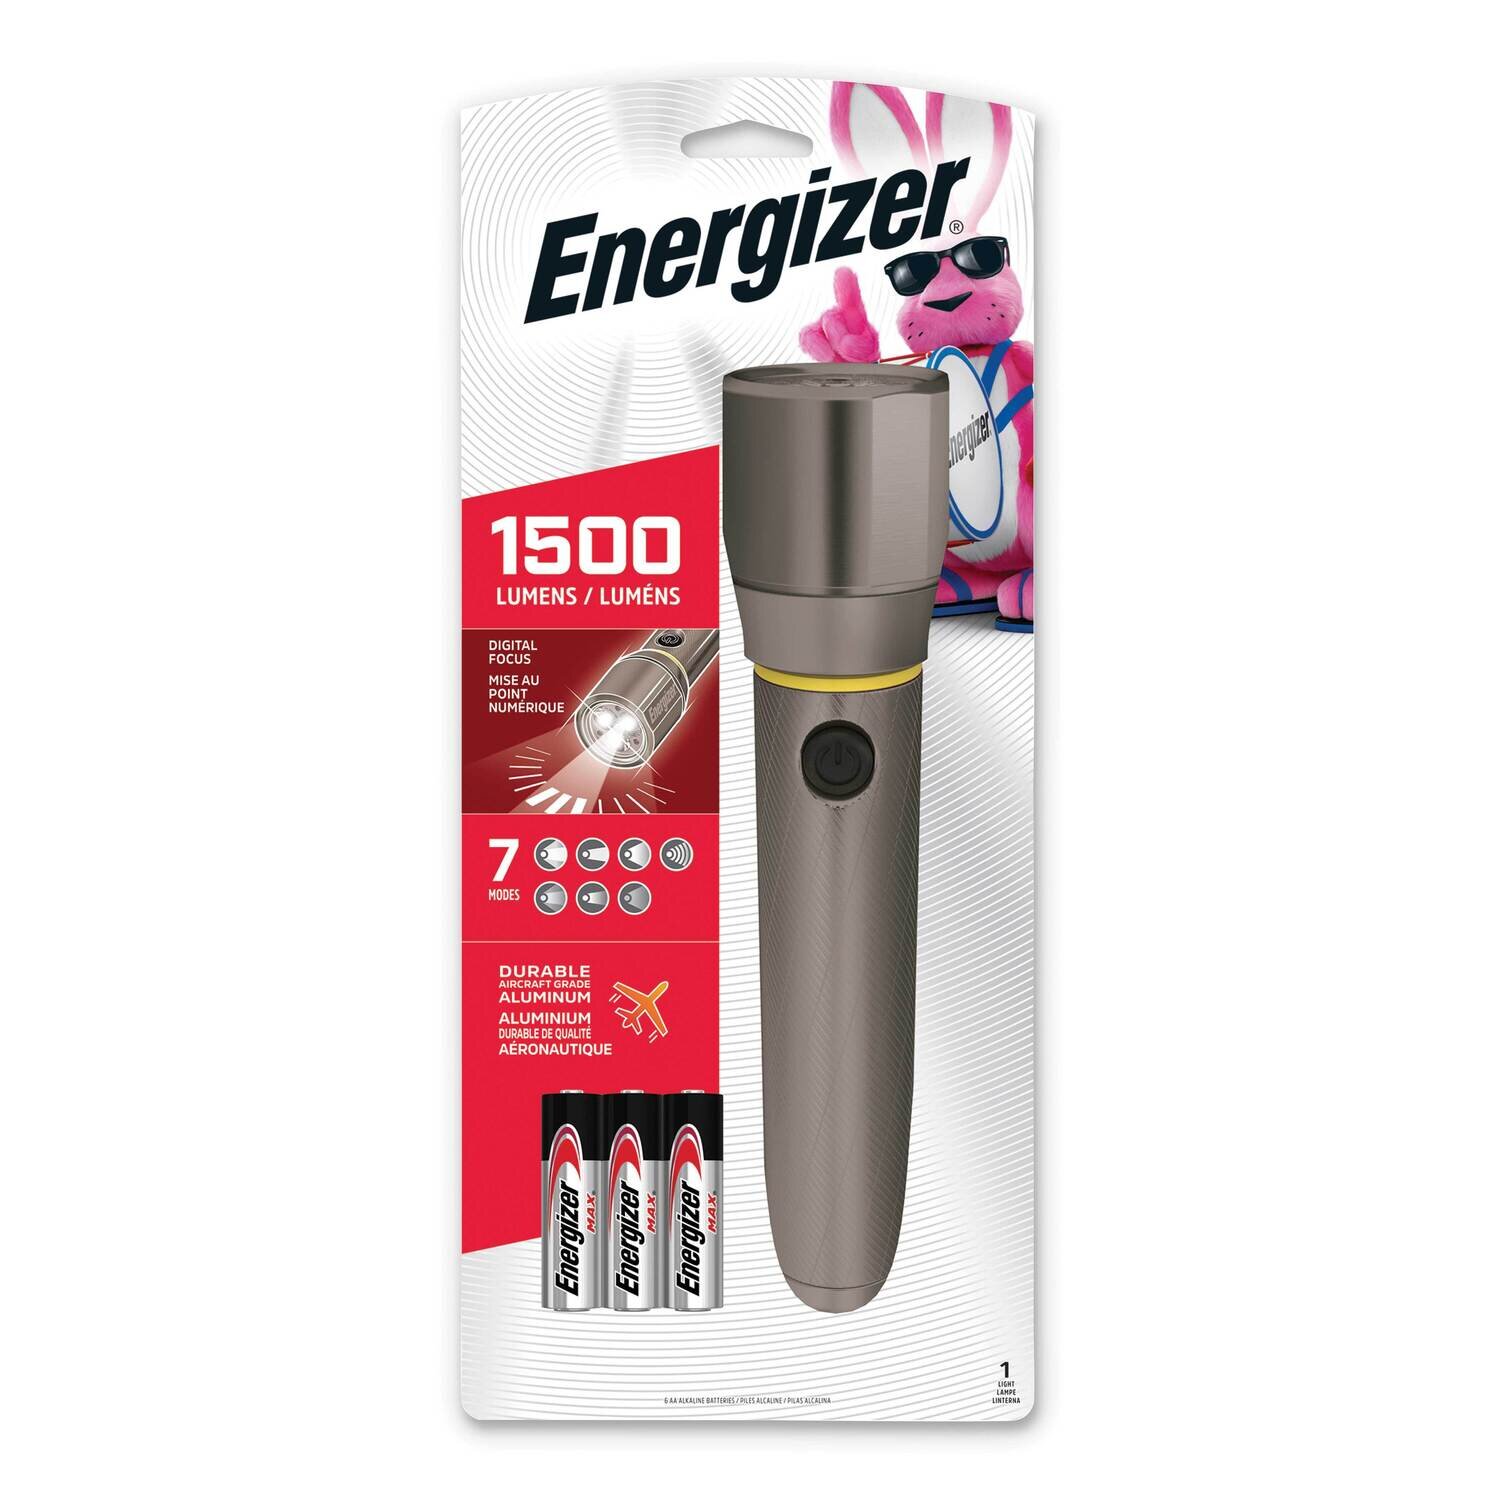 Energizer Performance Metal LED 1500 Lumens Flashlight with 6 Energizer AA Batteries JT5341